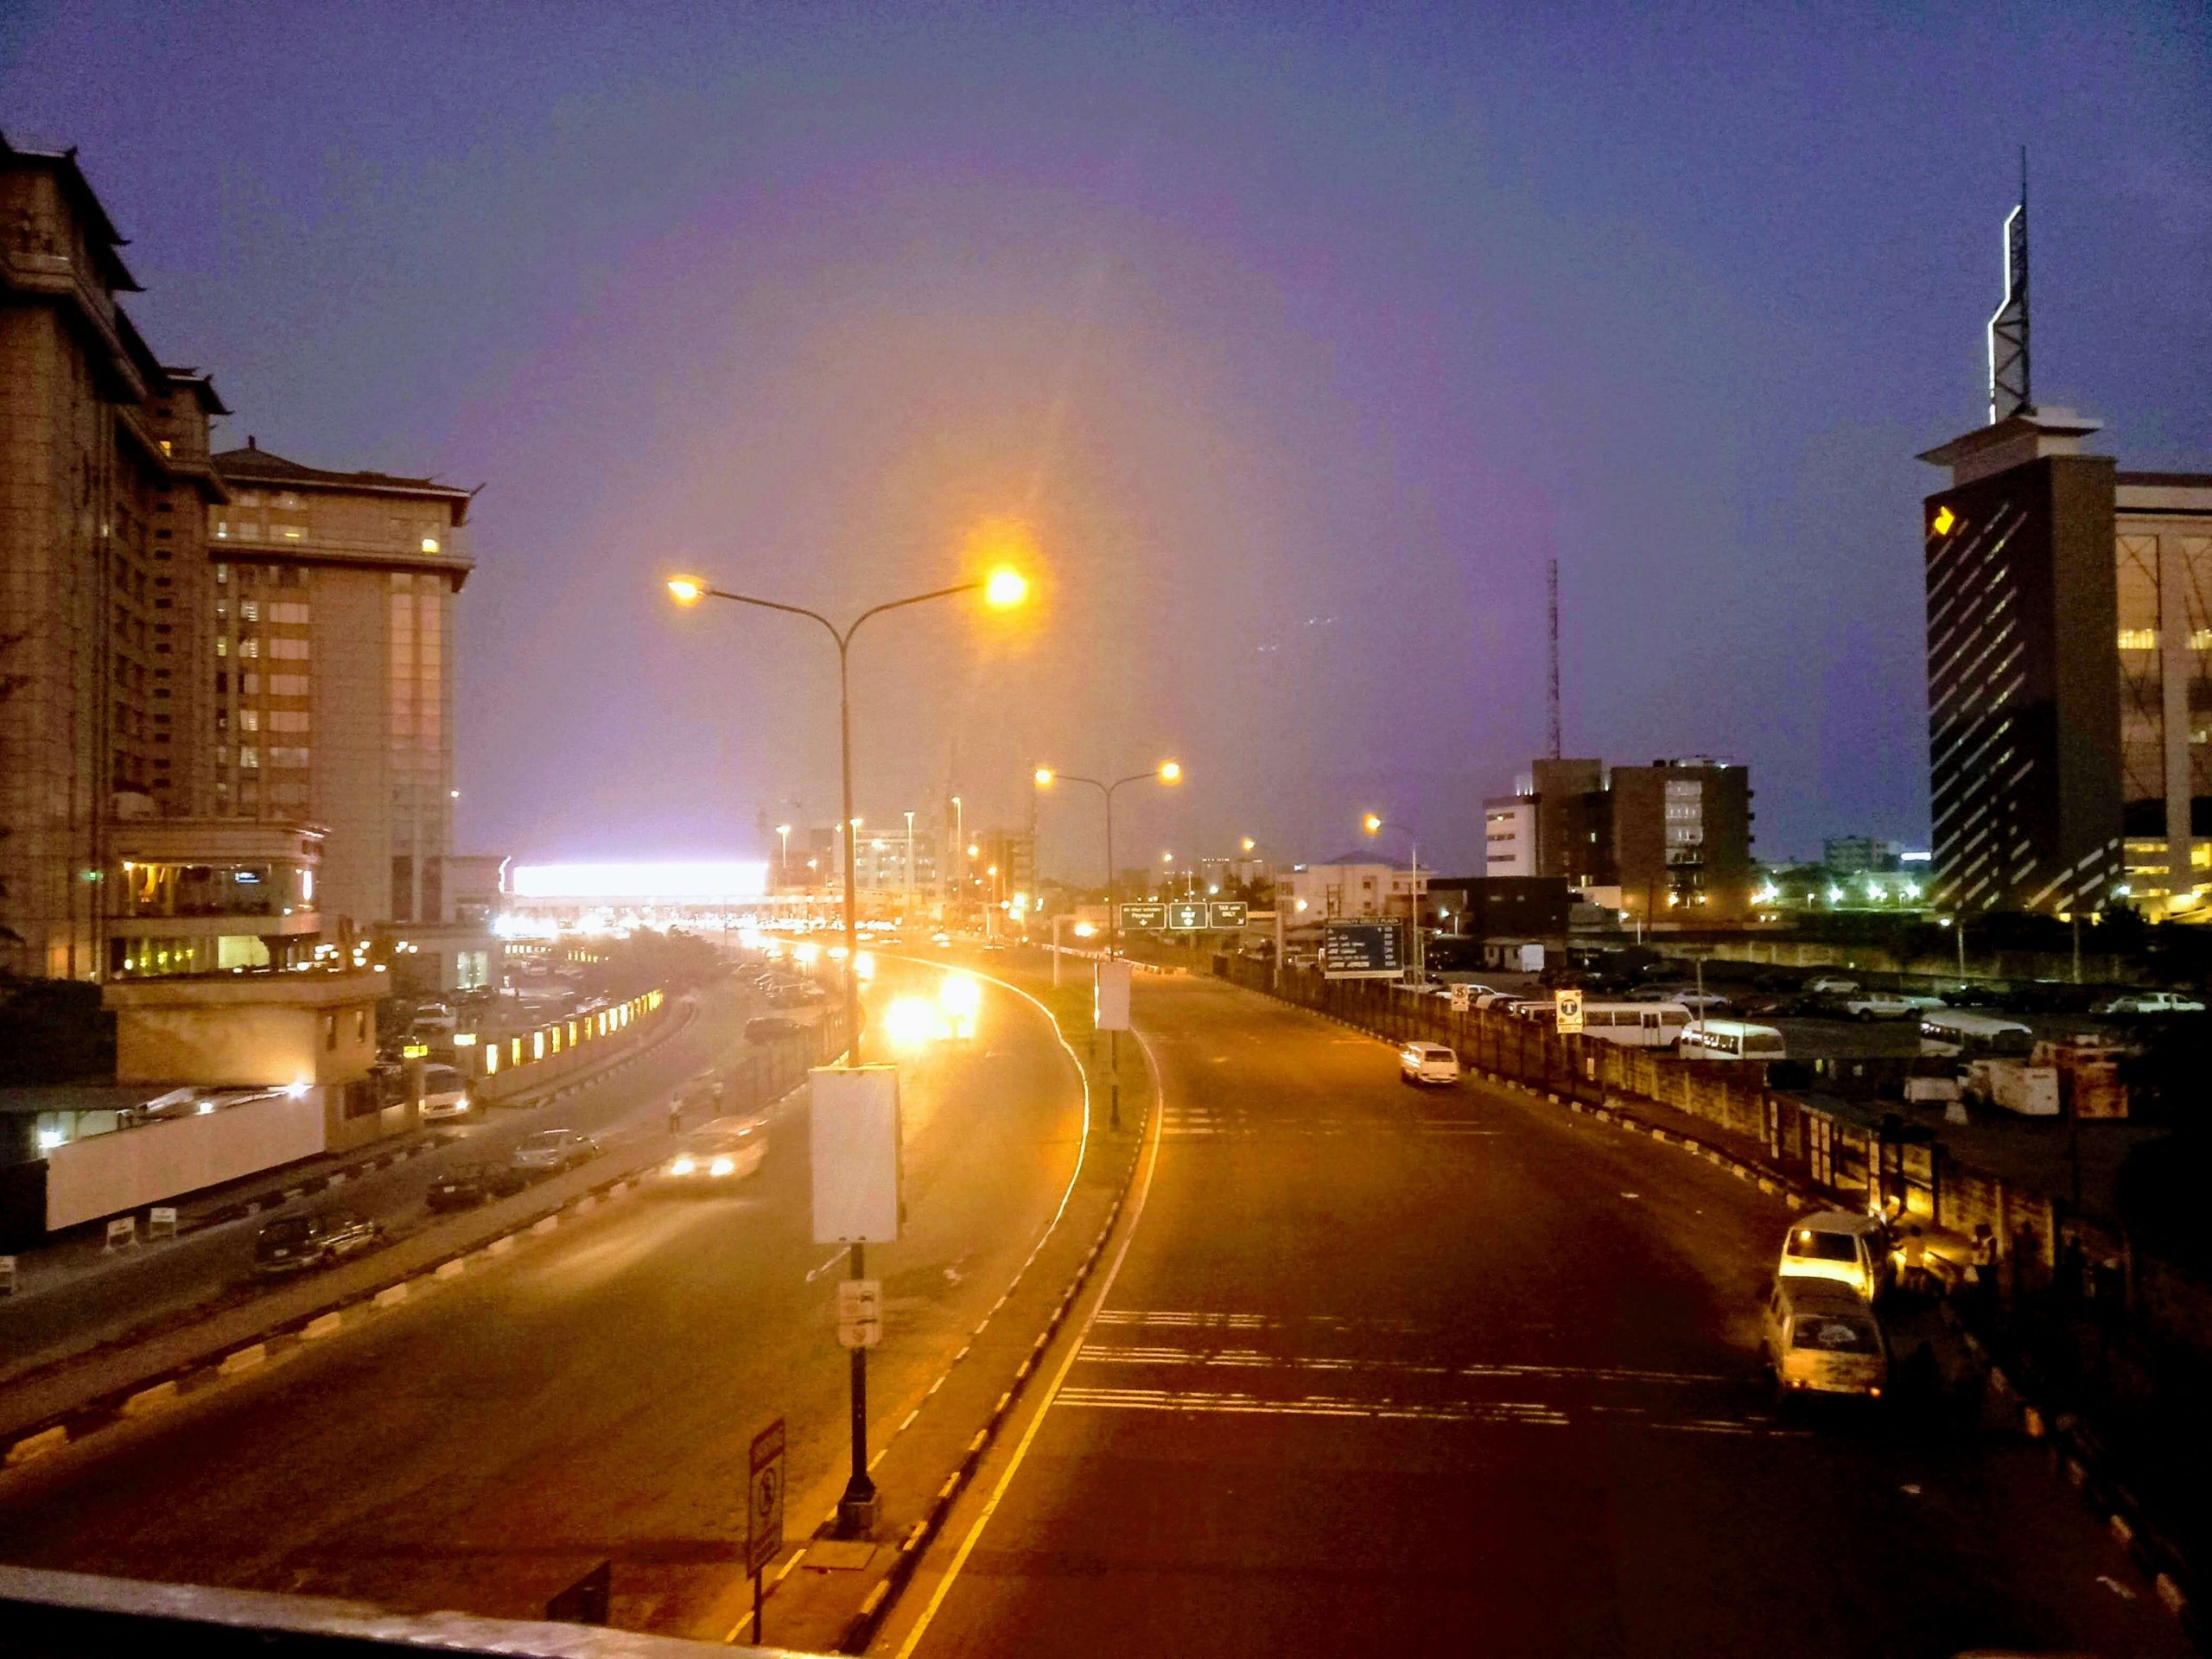 Knowing Lagos